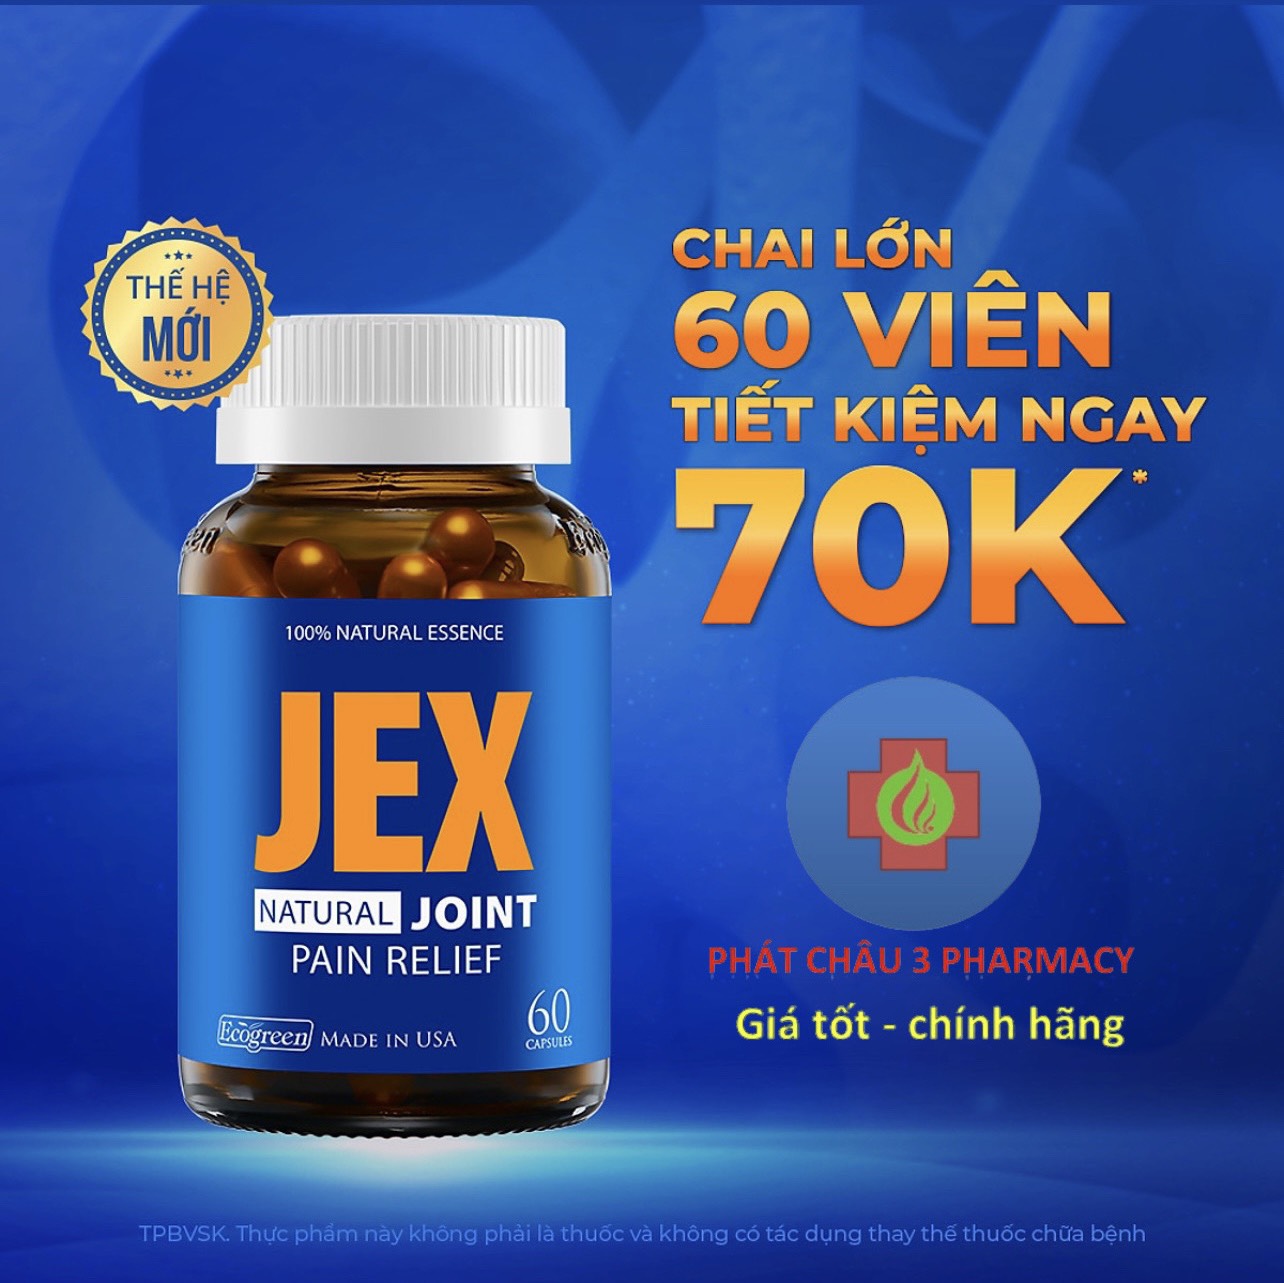 Jex Max pain relief tablet, kneecap protection